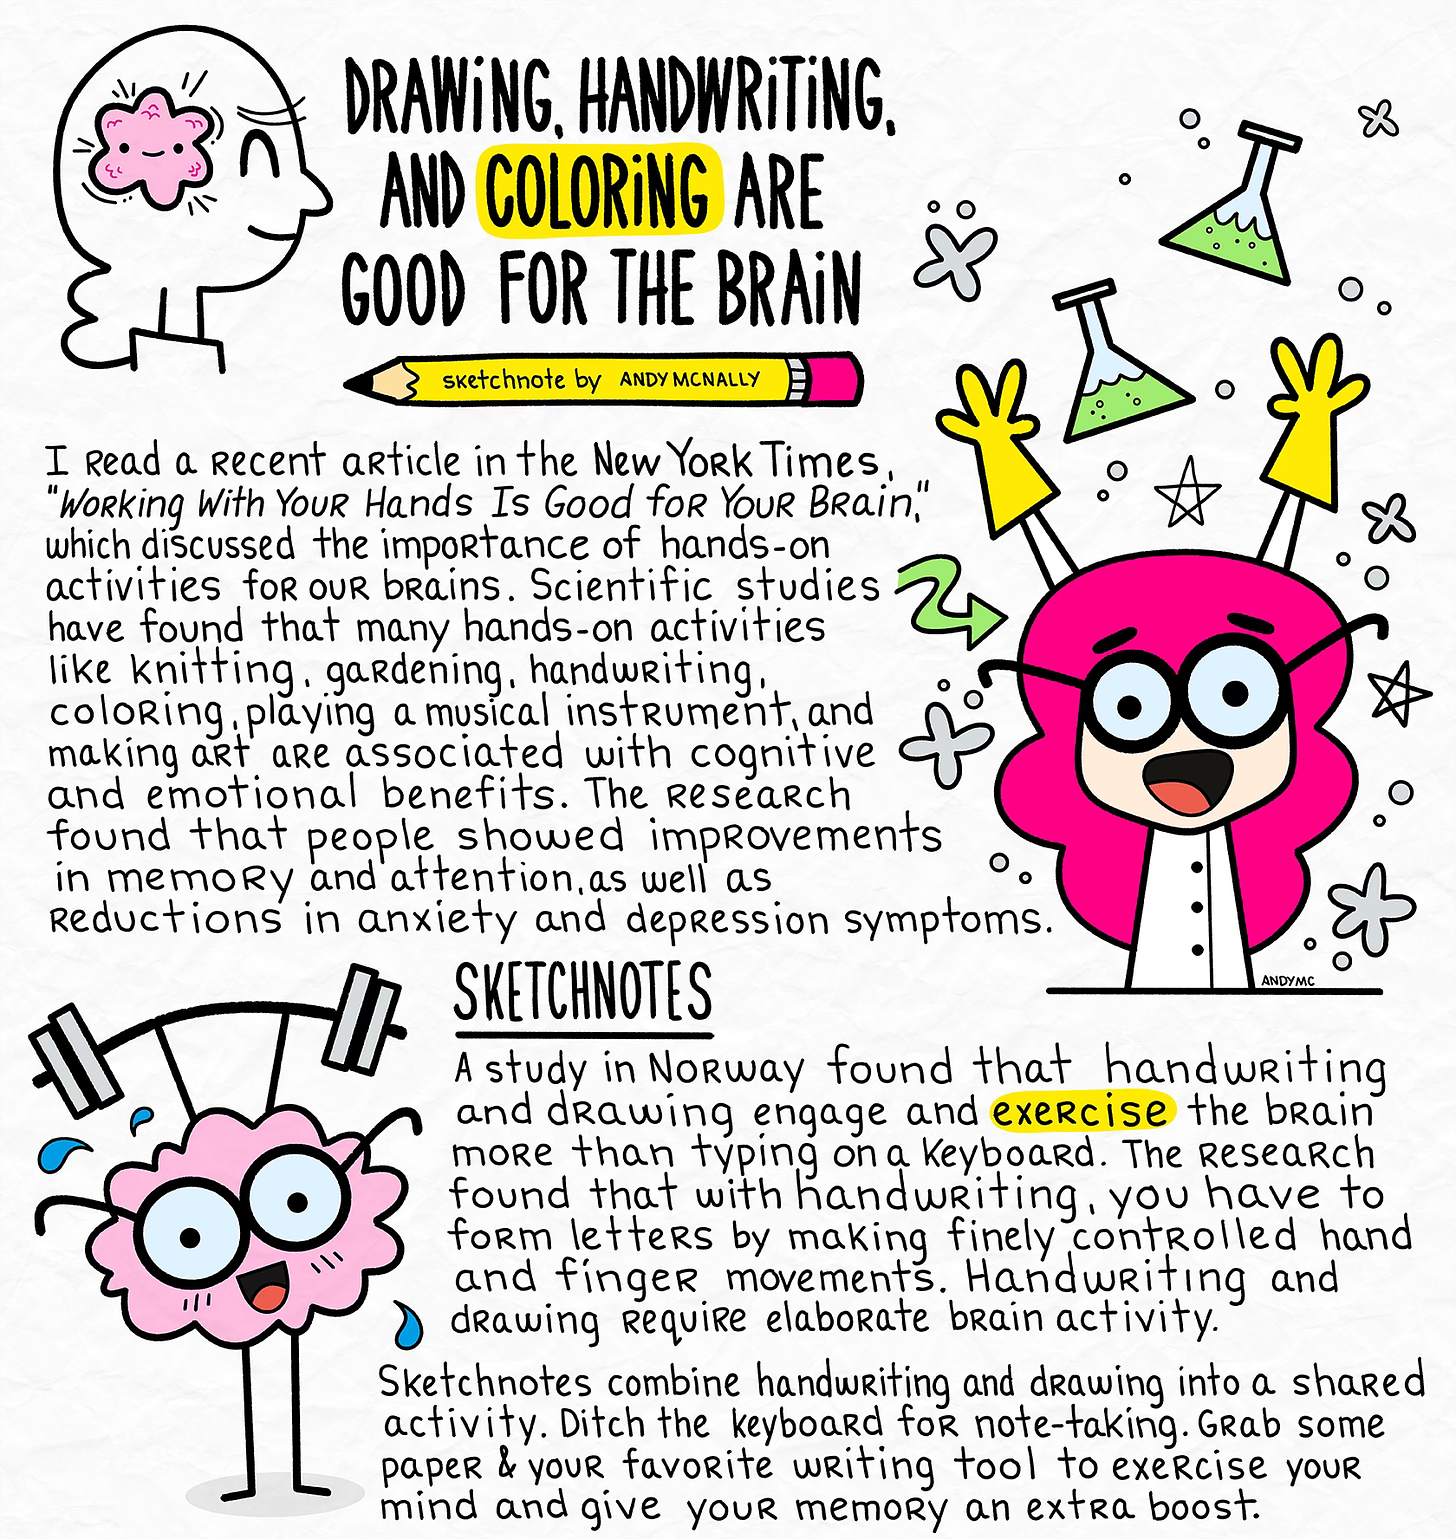 a sketchnote about how drawing and handwriting are good for the brain